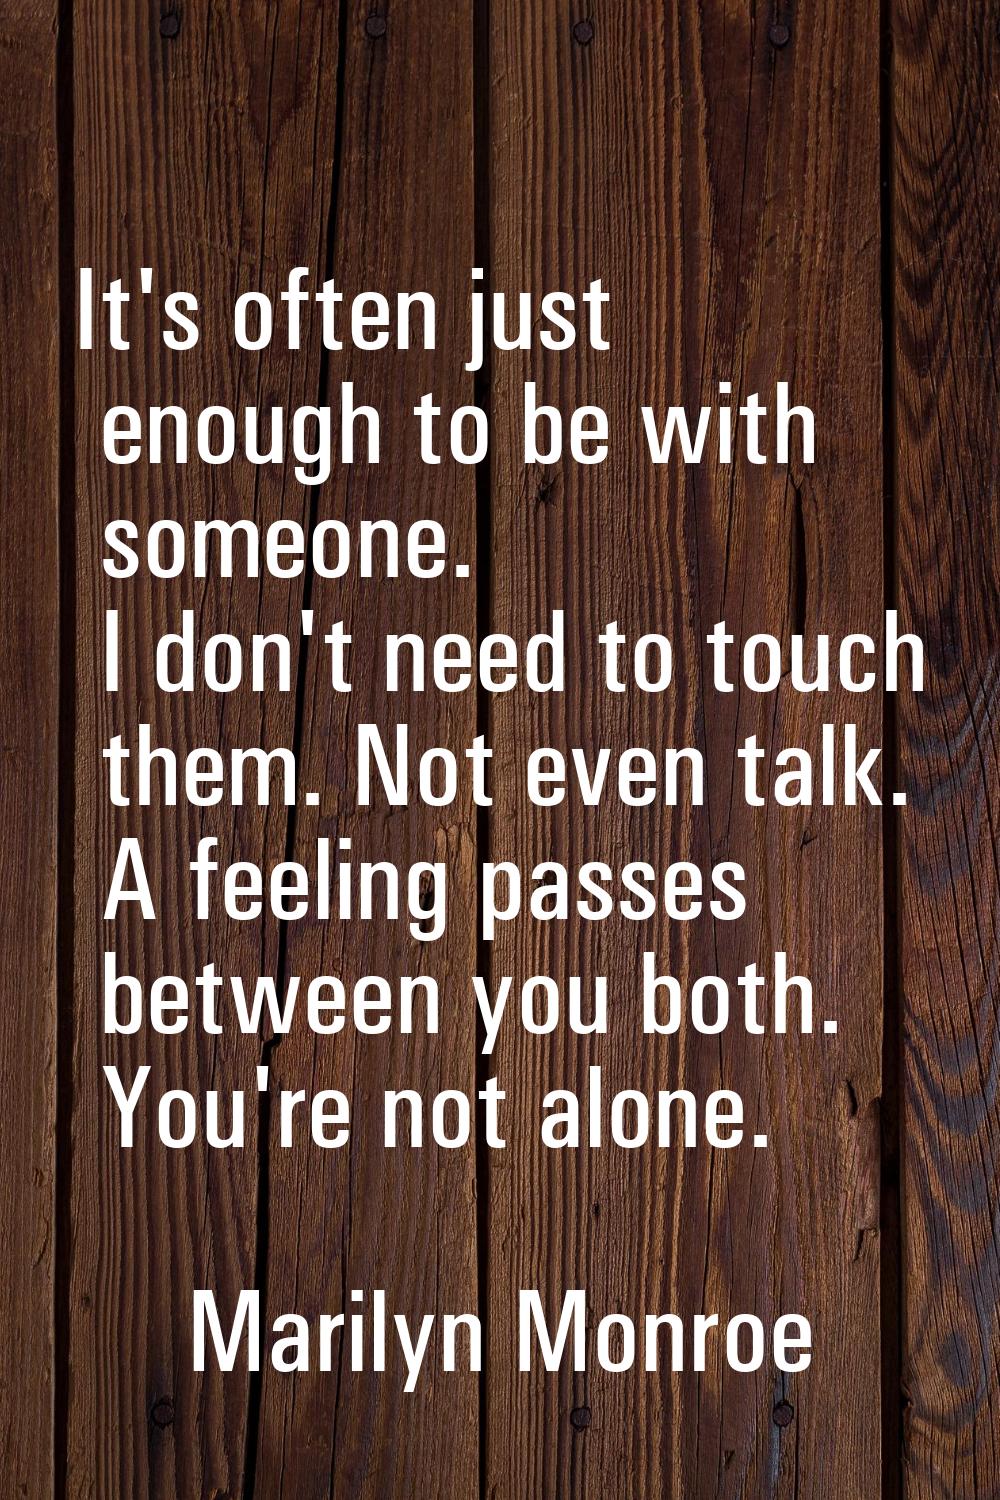 It's often just enough to be with someone. I don't need to touch them. Not even talk. A feeling pas